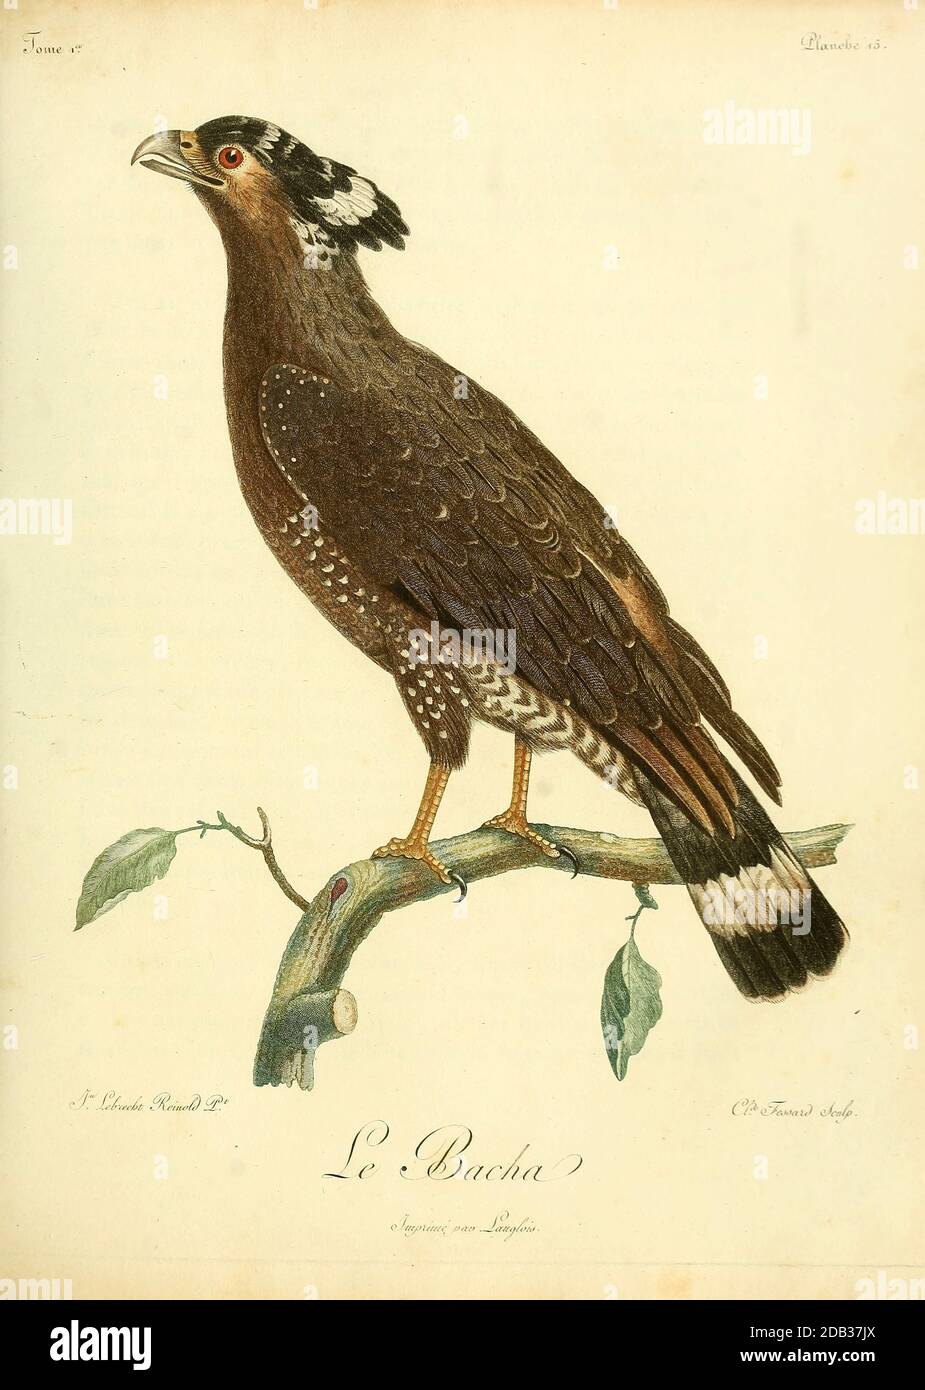 Serpentaire bacha Crested Serpent Eagle (Spilornis cheela) is a medium-sized bird of prey that is found in forested habitats across tropical Asia. Within its widespread range across the Indian Subcontinent, Southeast Asia and East Asia, from the Book Histoire naturelle des oiseaux d'Afrique [Natural History of birds of Africa] by Le Vaillant, François, 1753-1824; Publish in Paris by Chez J.J. Fuchs, libraire .1799 Stock Photo